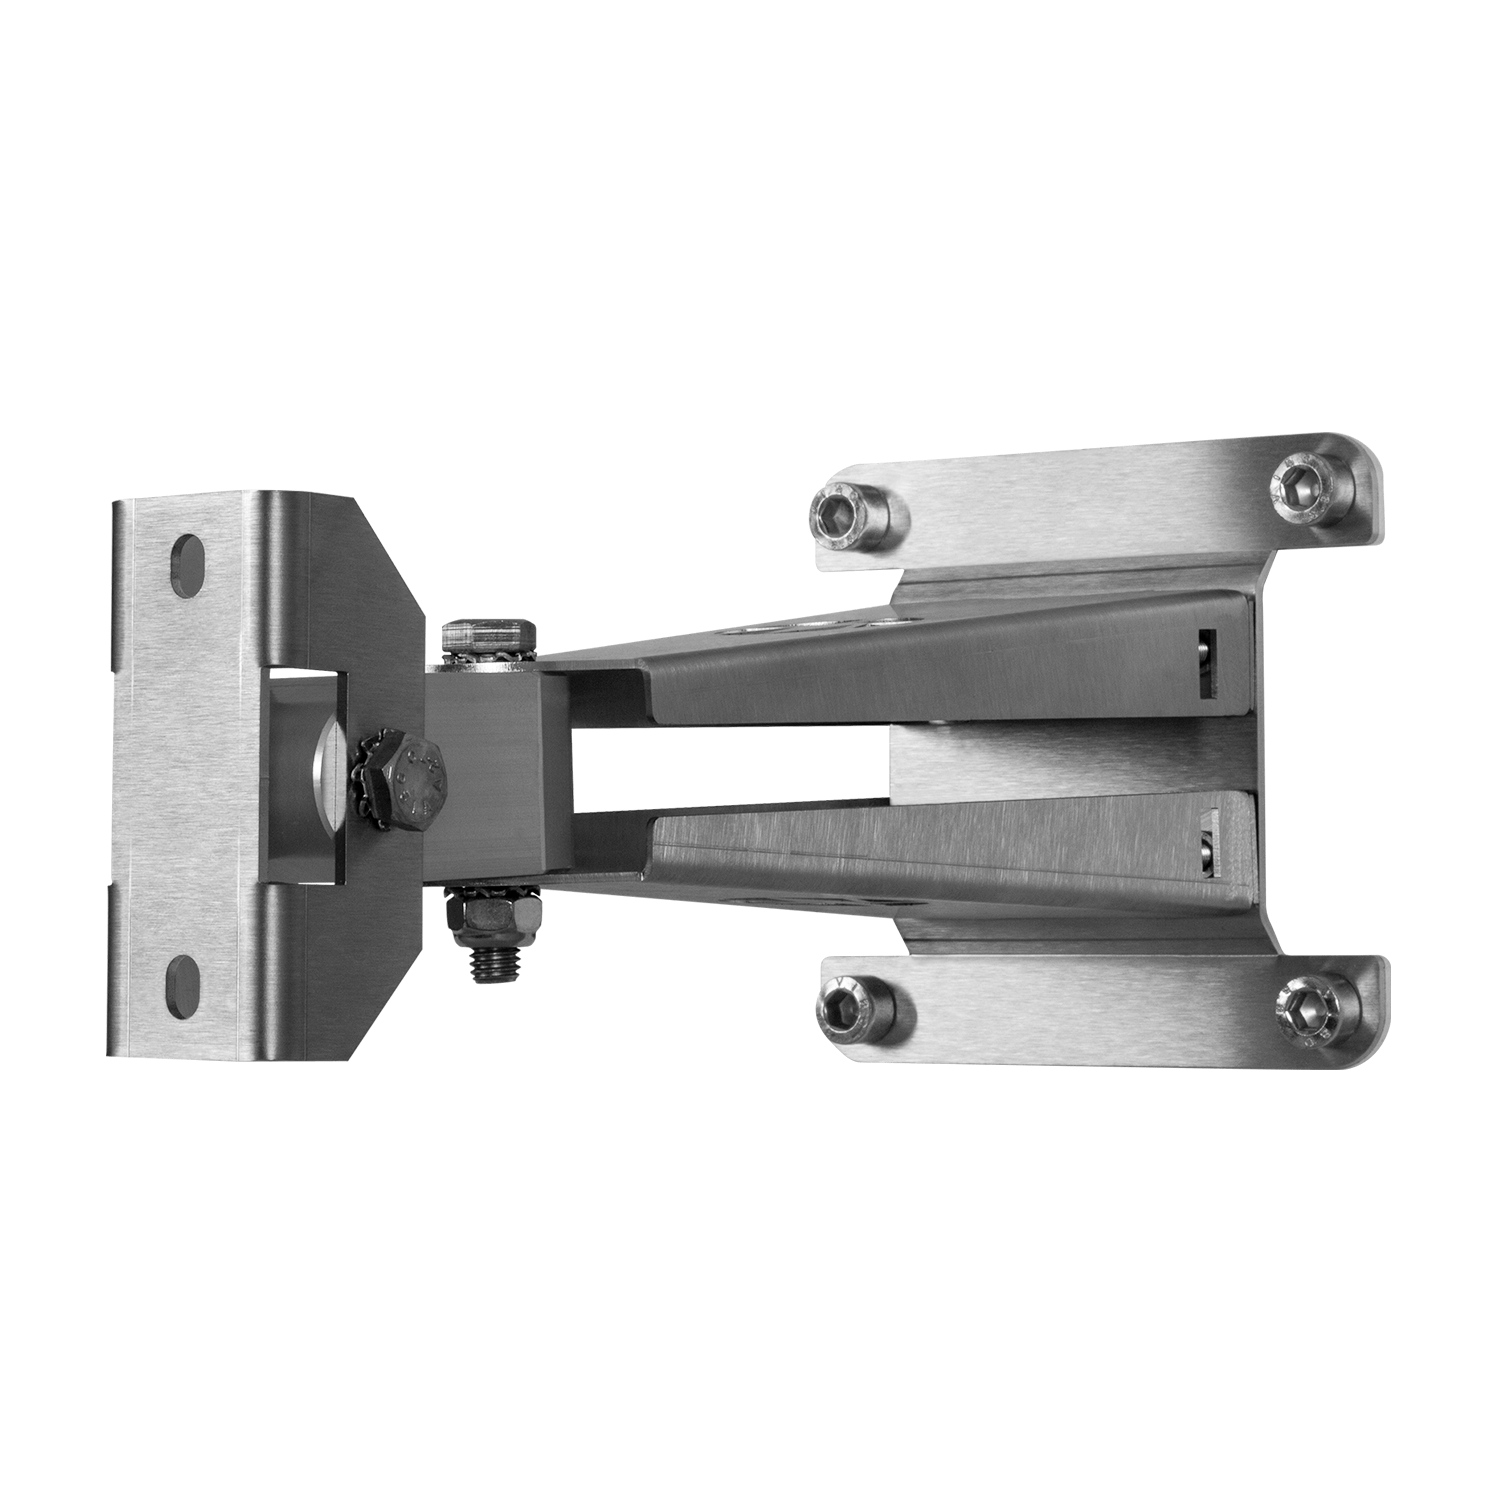 LRM 4 - Articulated arm for wall and pole mounting